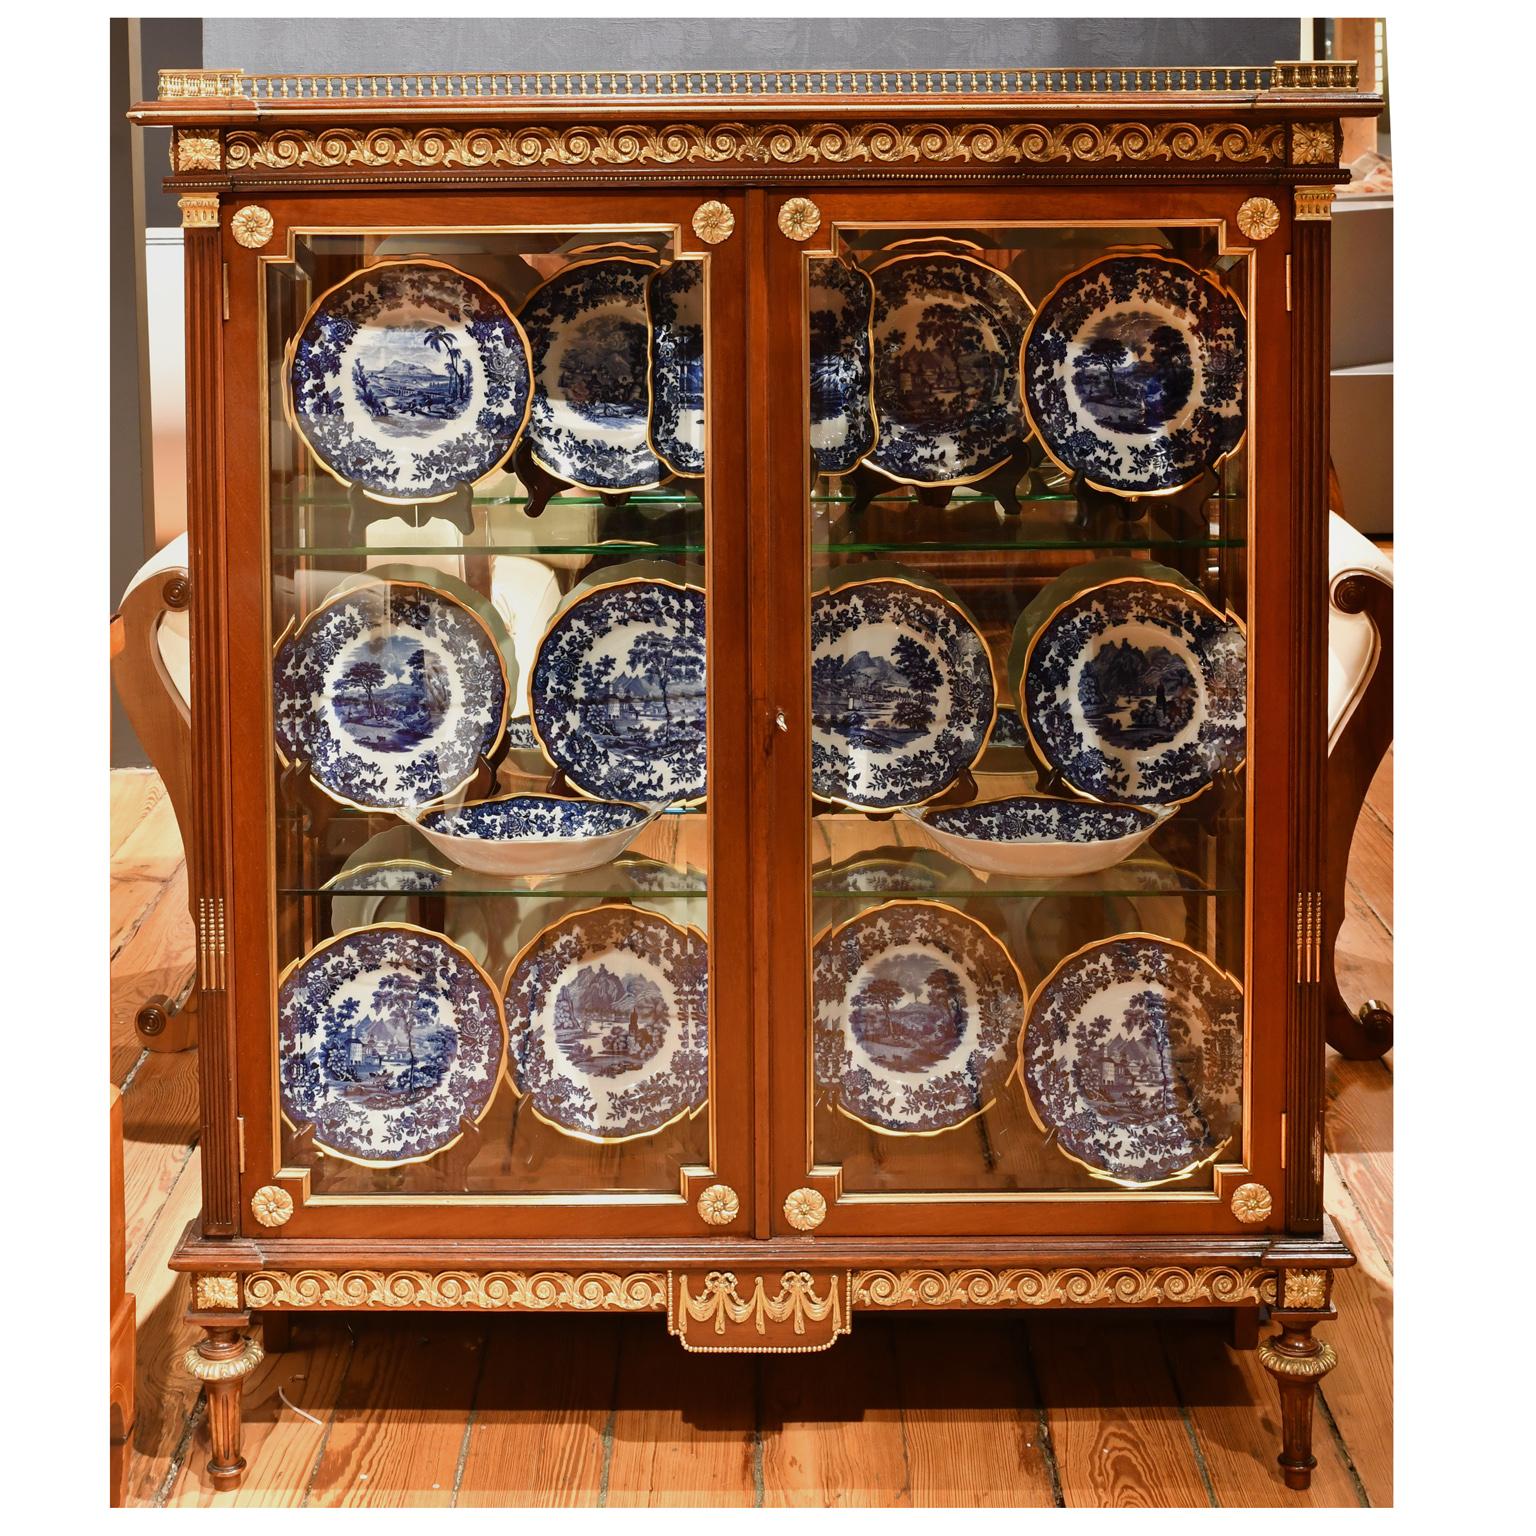 From the Gilded Age, a very beautiful New York City vitrine in the Louis XVI style, attributable to Leon Marcotte, in mahogany with Fine brass ormolu mounts and gallery, beveled glass on front and side panels, and two adjustable glass shelves, circa